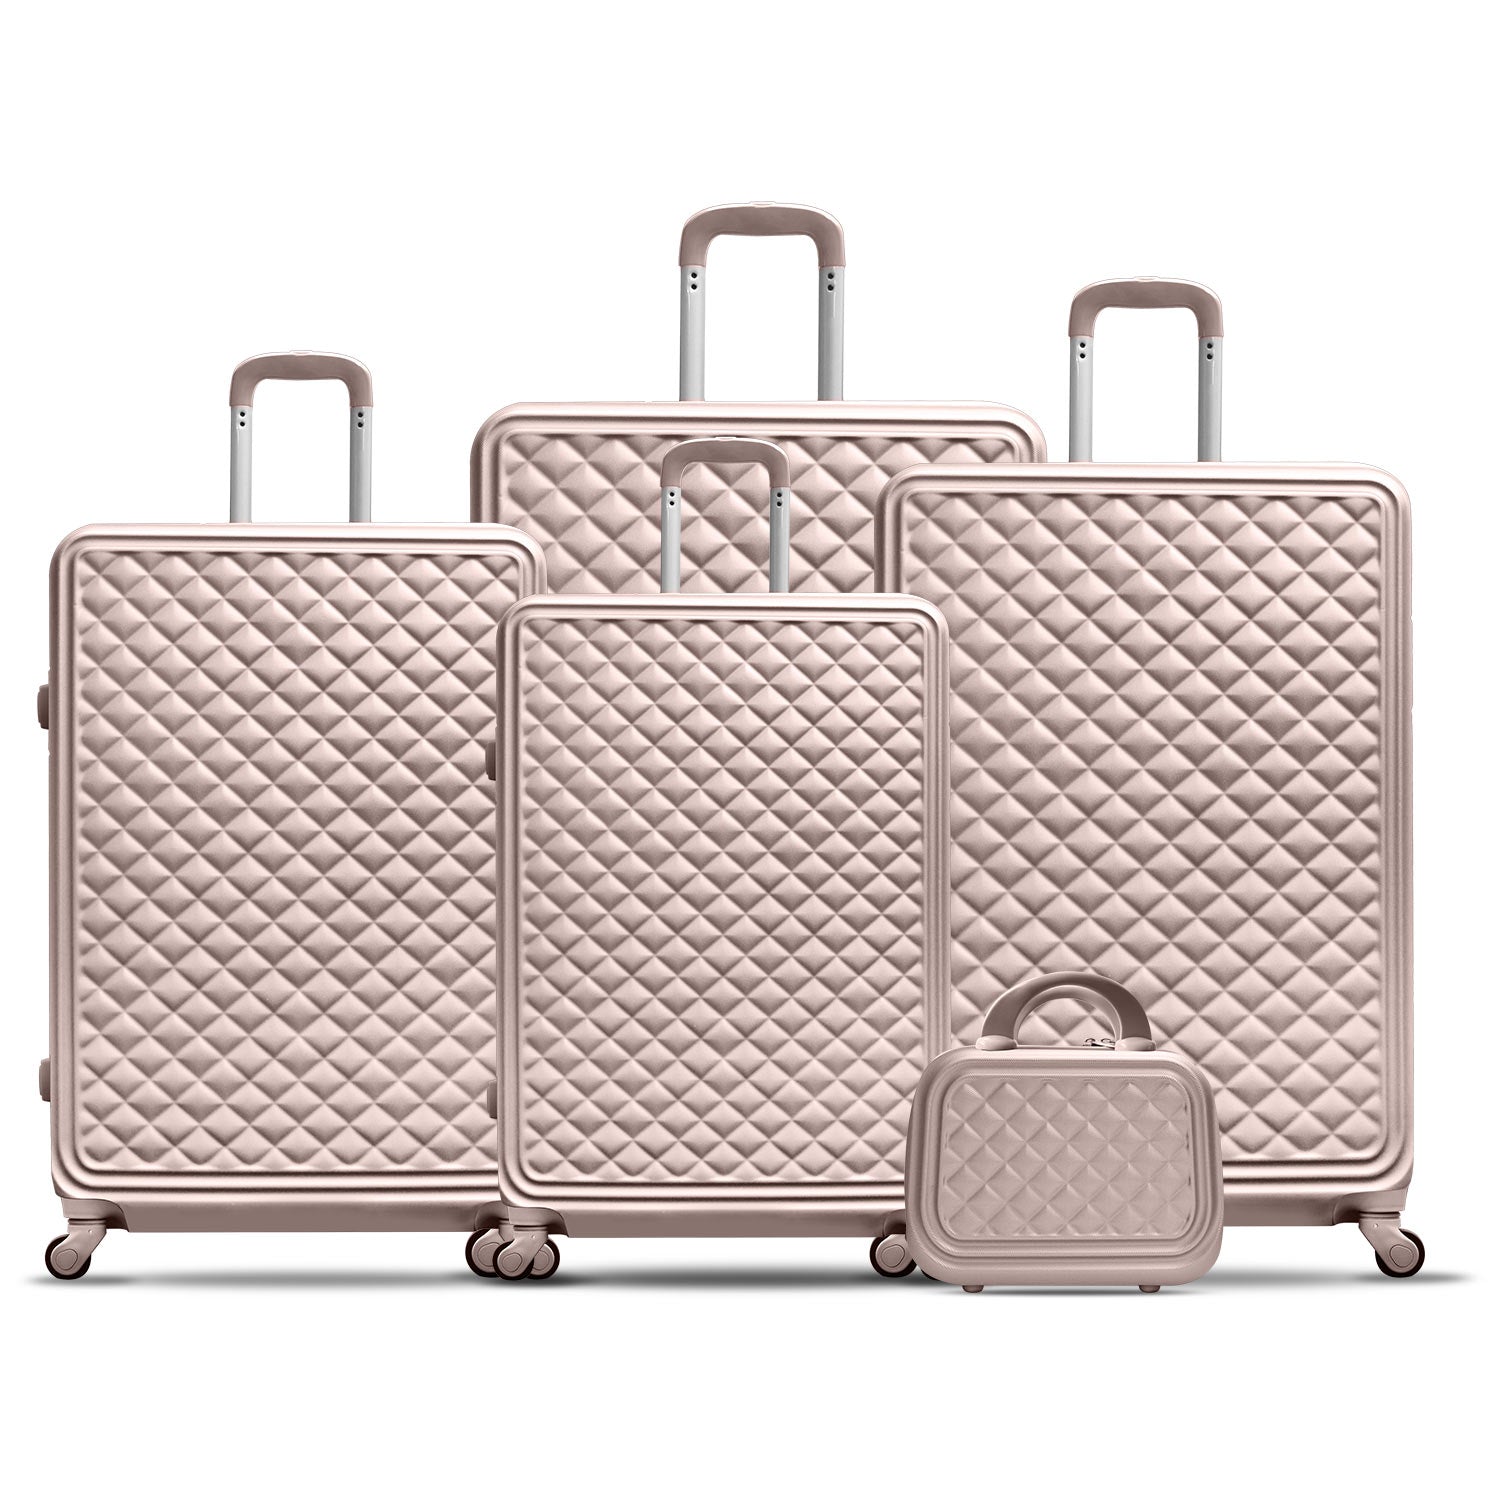 SUMO X-VOYAGER ABS LUGGAGE  5PC SET (12/20/24/28/32")